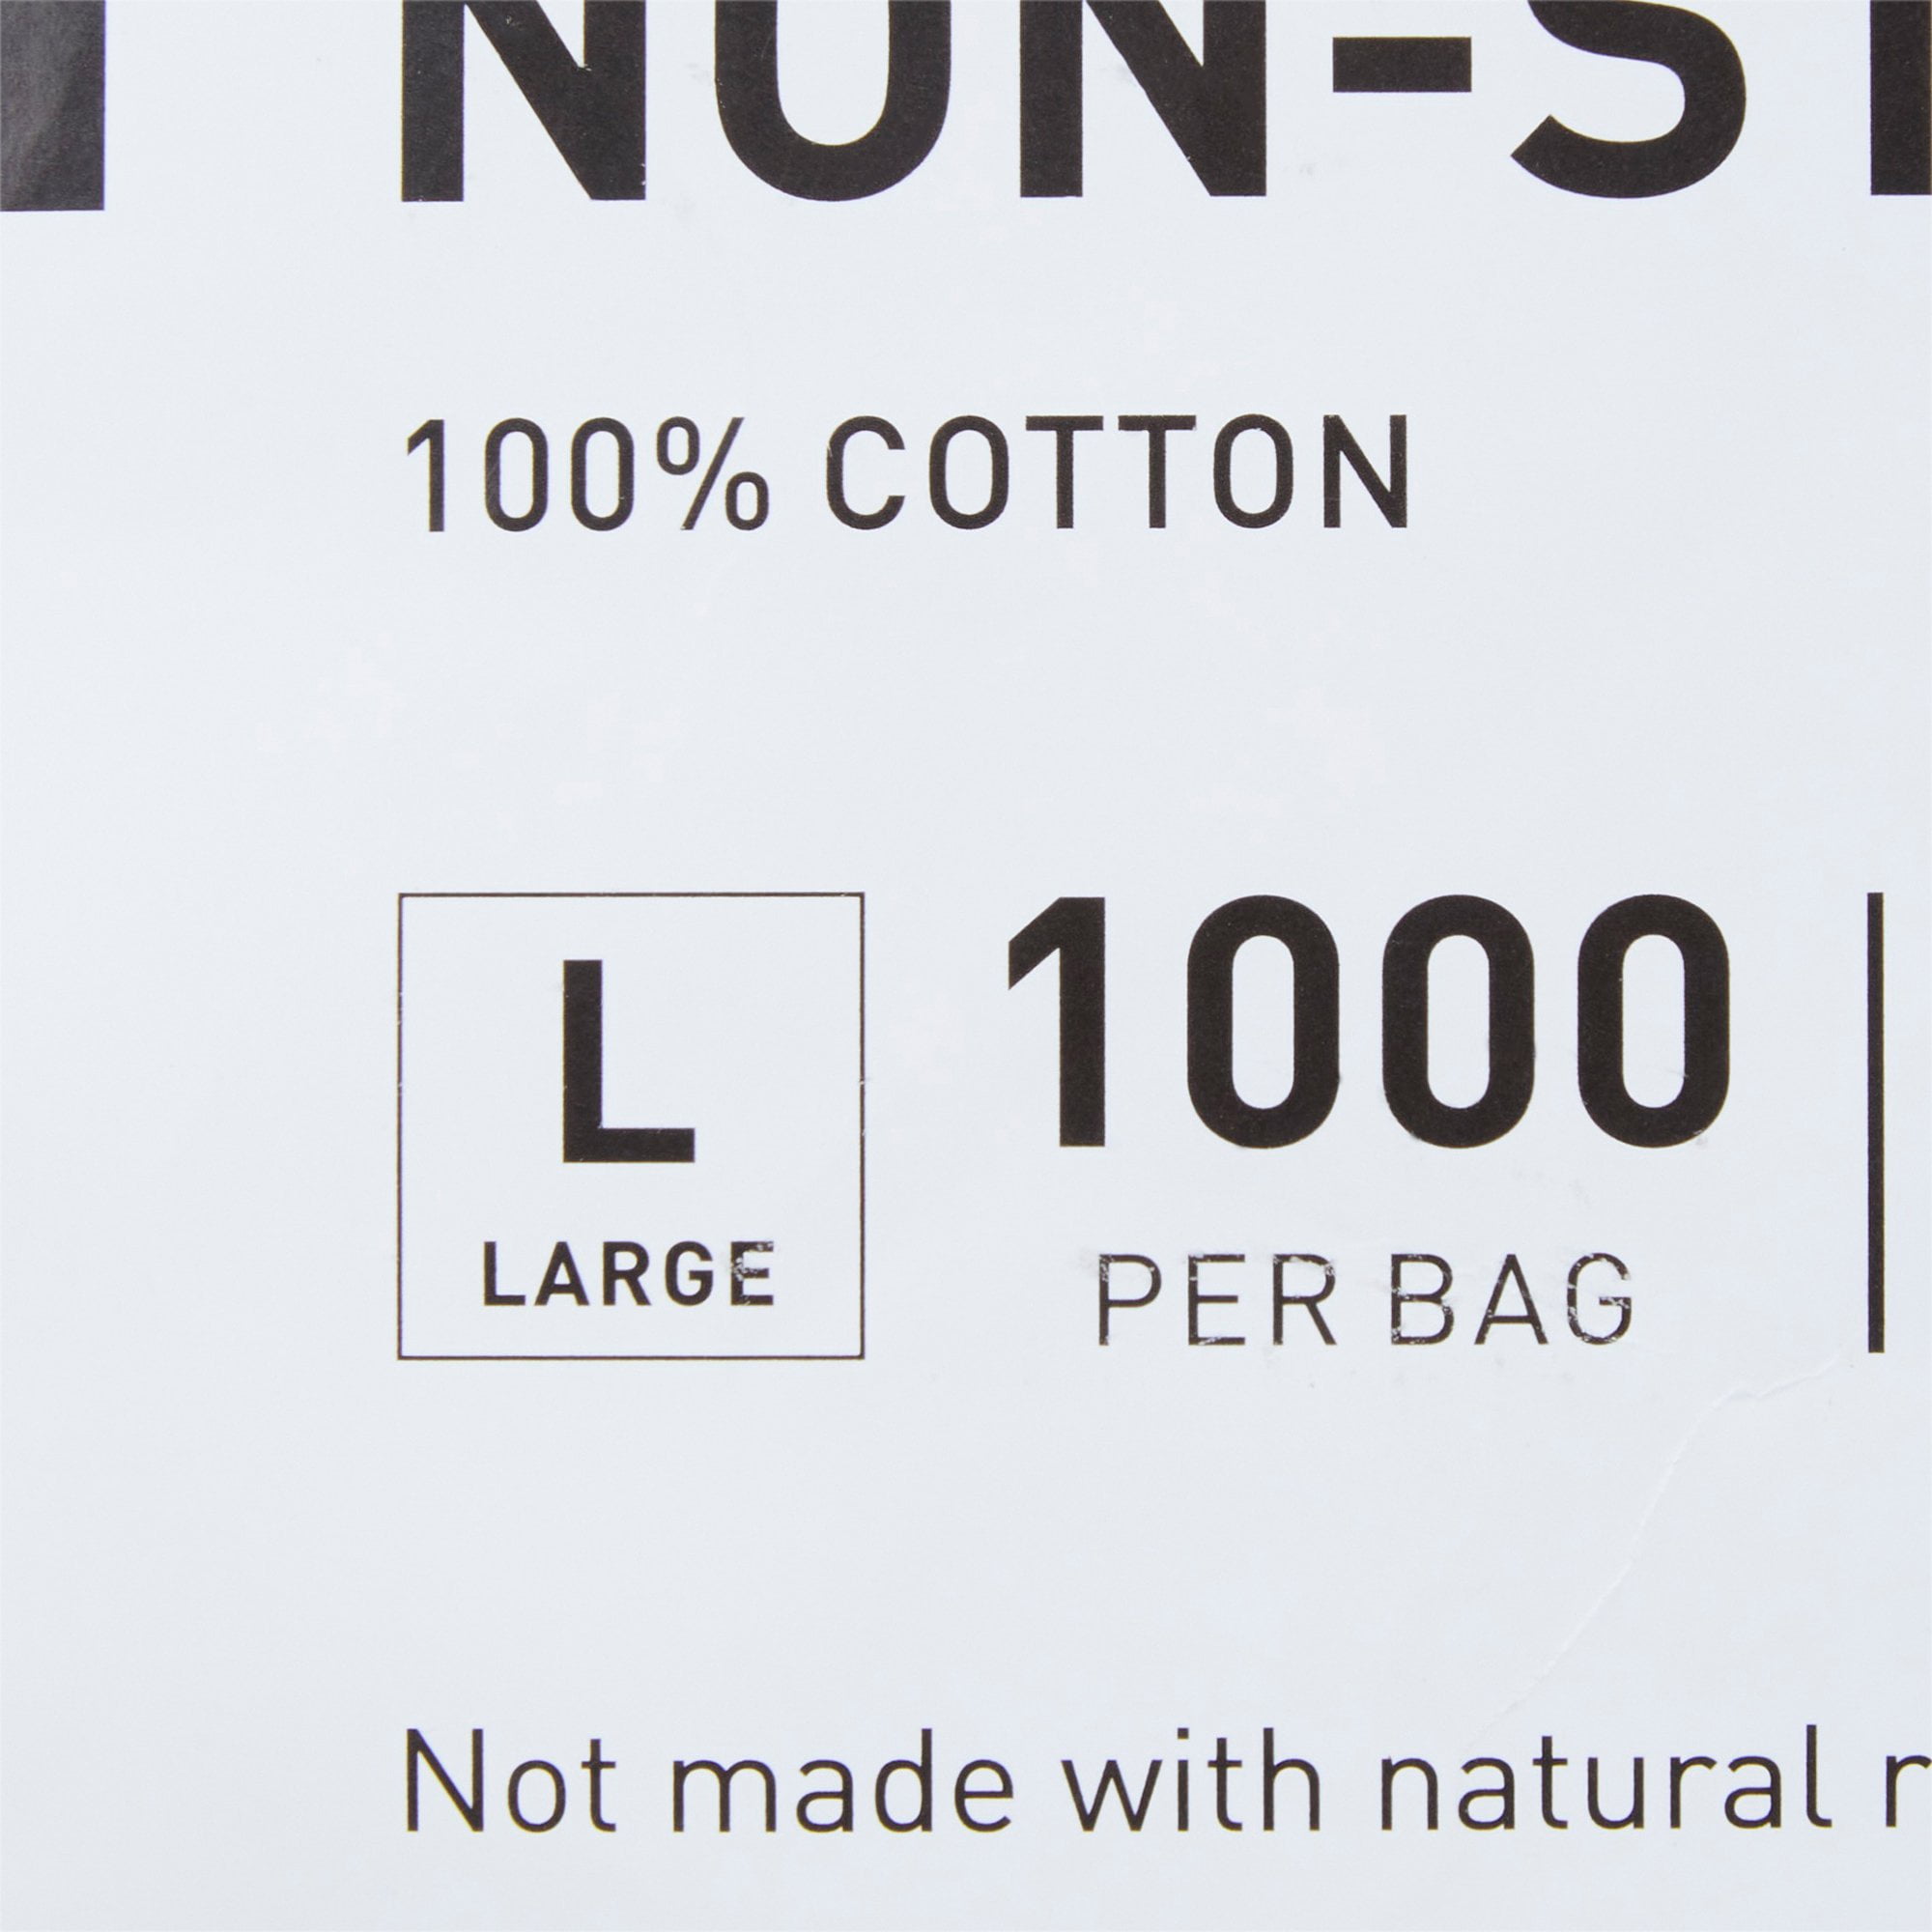 Fisherbrand Nonsterile Cotton Balls Large:First Aid and Medical